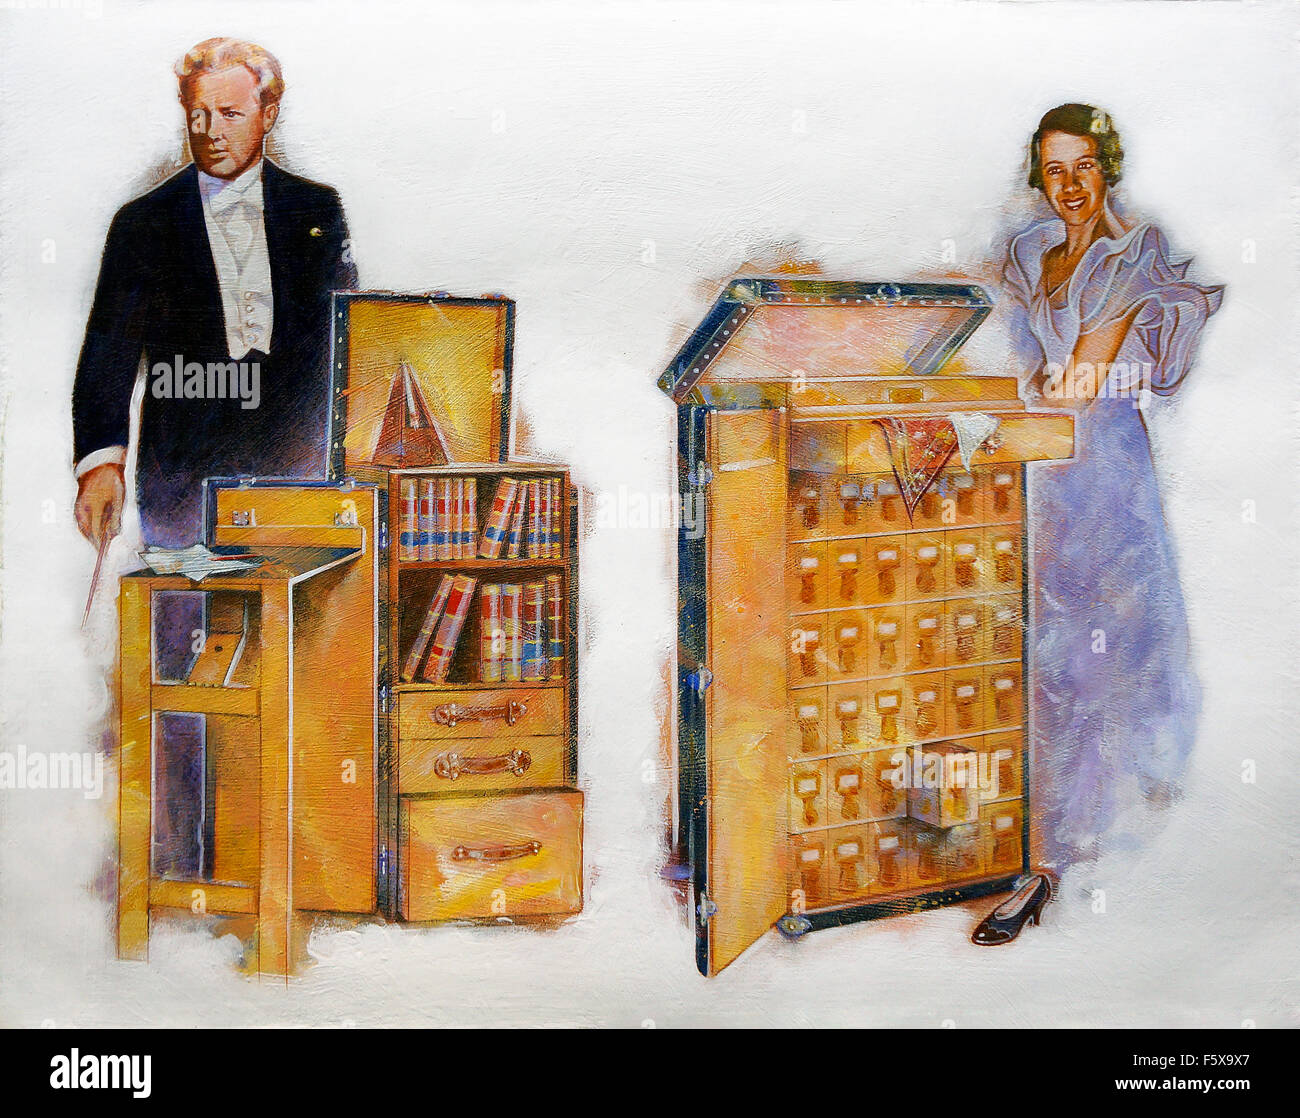 Illustration in acrylics depicting Louis Vuitton trunks featuring conductor Leopold Stokowski and soprano singer Lily Pons. Stock Photo